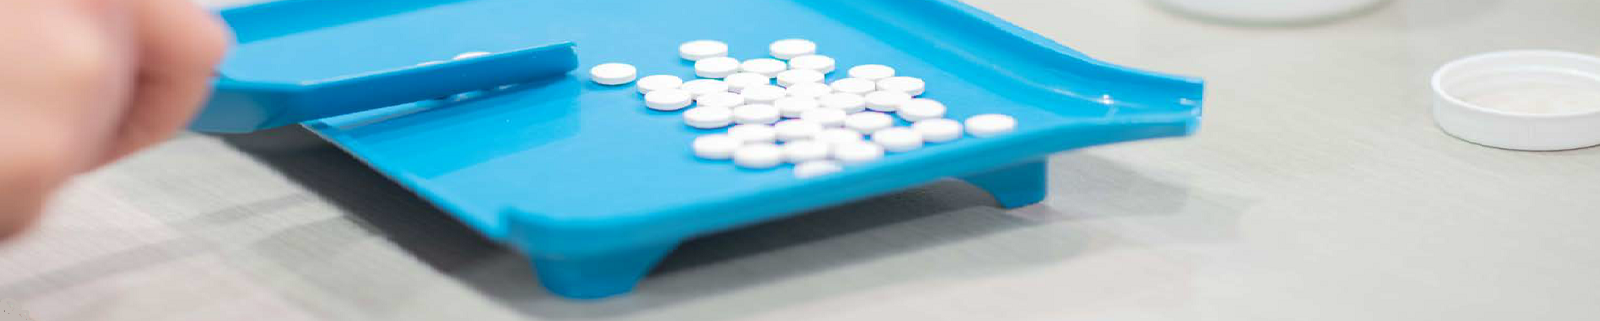 pills on a dispensing tray. 